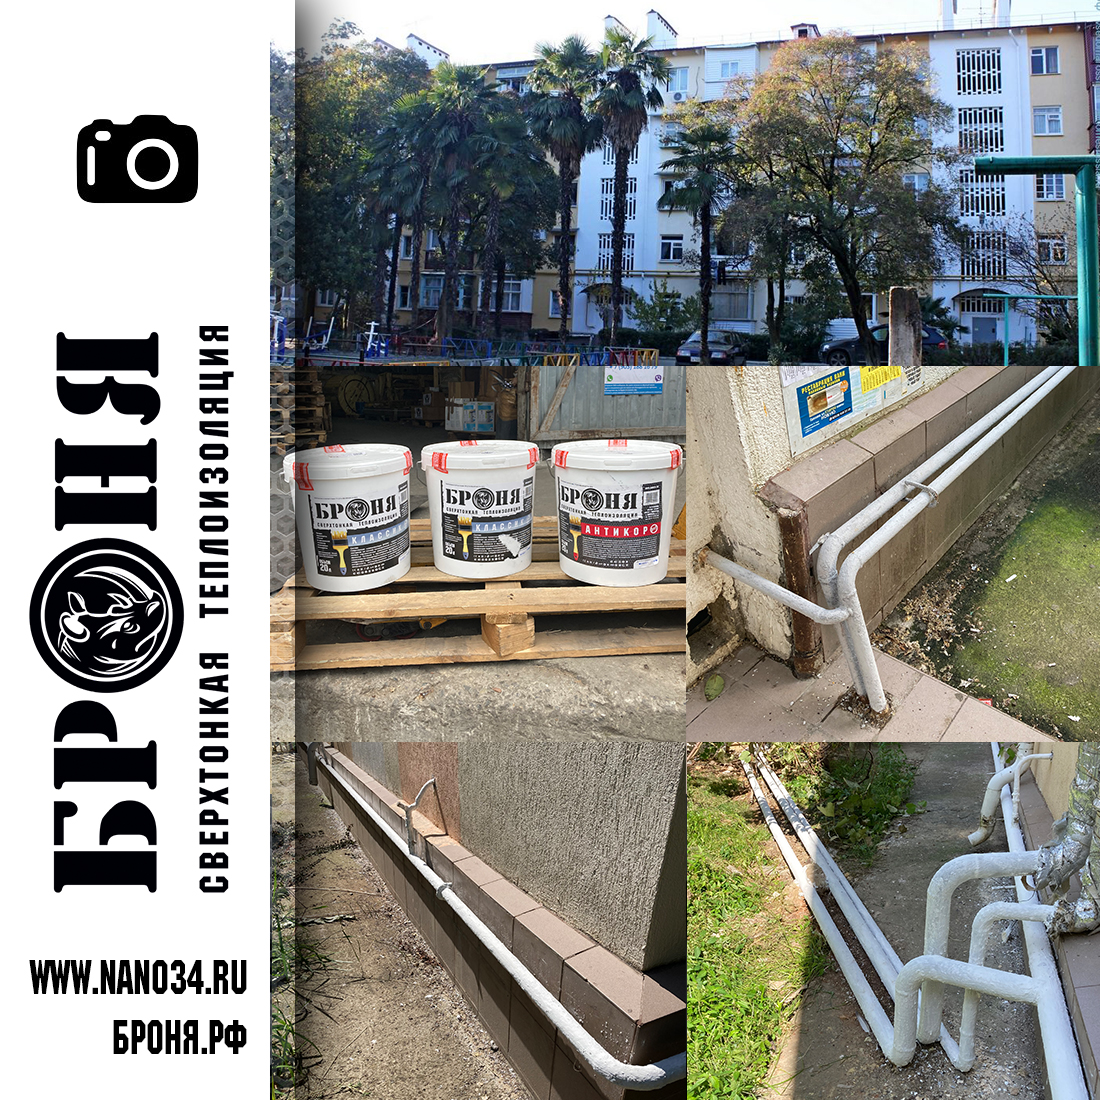 Bronya Antikor and Bronya Classic for thermal insulation of hot water and cold water pipes of a five-story residential building. Replacing the outdated method of thermal insulation with our innovative thermal insulation Adler, Sochi. (Photo and video)